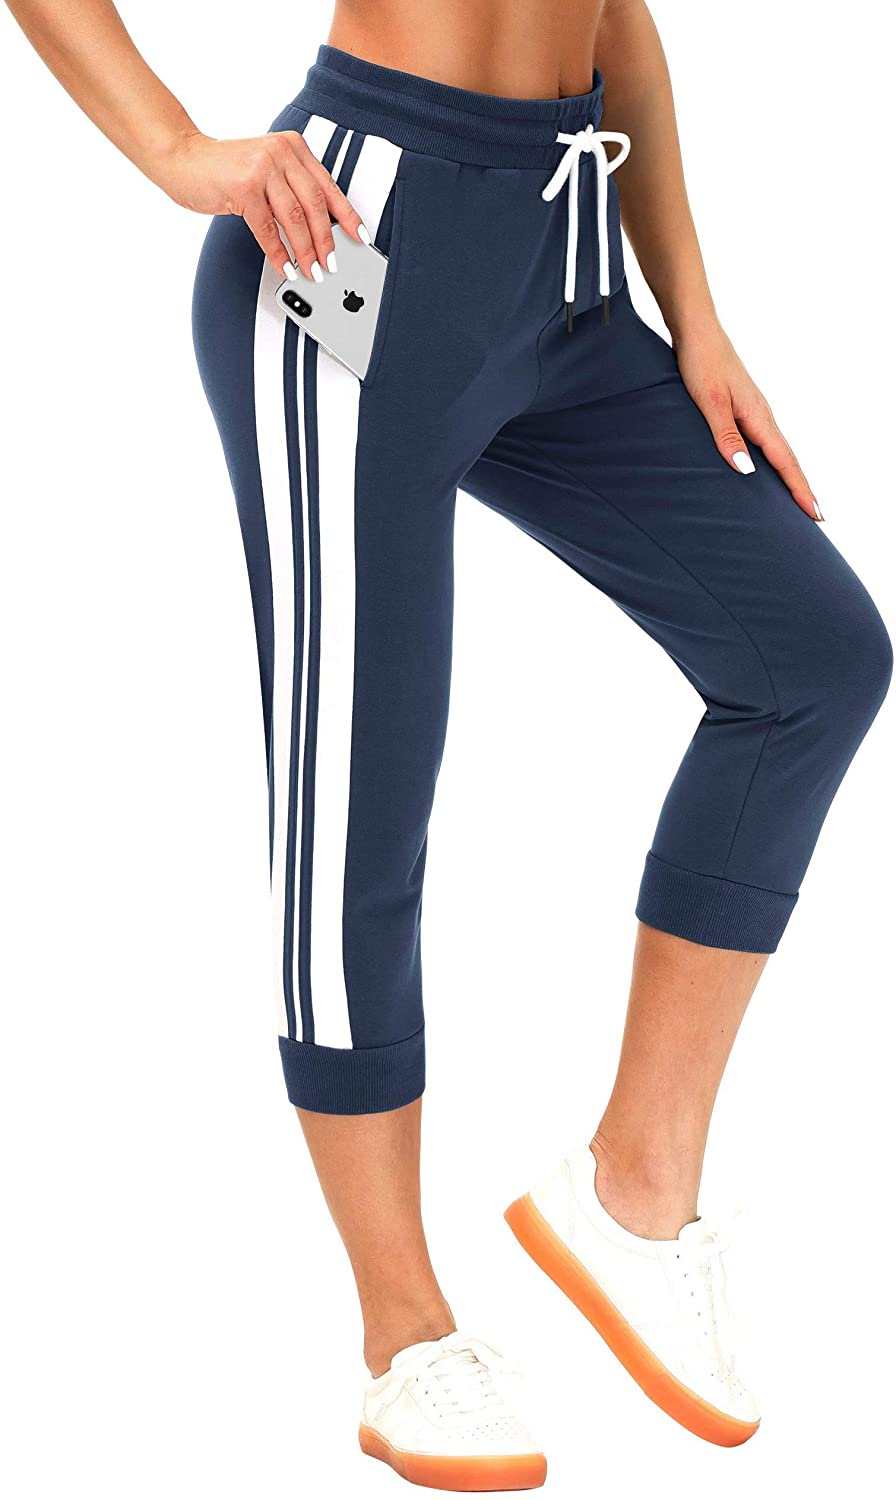 SPECIALMAGIC Capri Sweatpants for Women Casual Camo Cropped Joggers with Pockets Yoga Running 